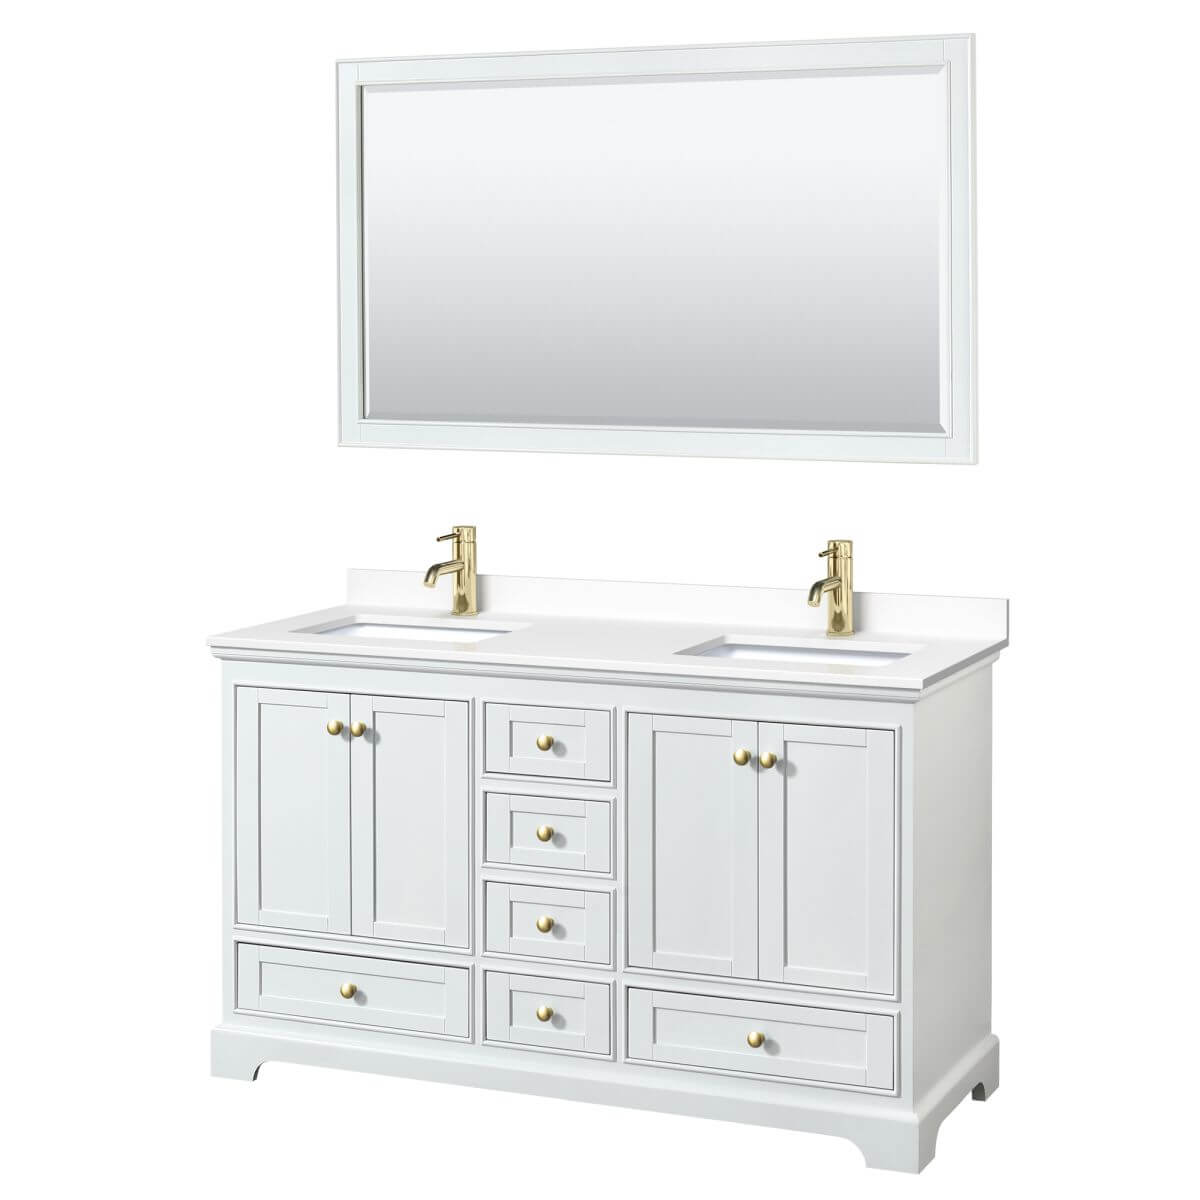 Wyndham Collection Deborah 60 inch Double Bathroom Vanity in White with White Cultured Marble Countertop, Undermount Square Sinks, Brushed Gold Trim and 58 inch Mirror - WCS202060DWGWCUNSM58